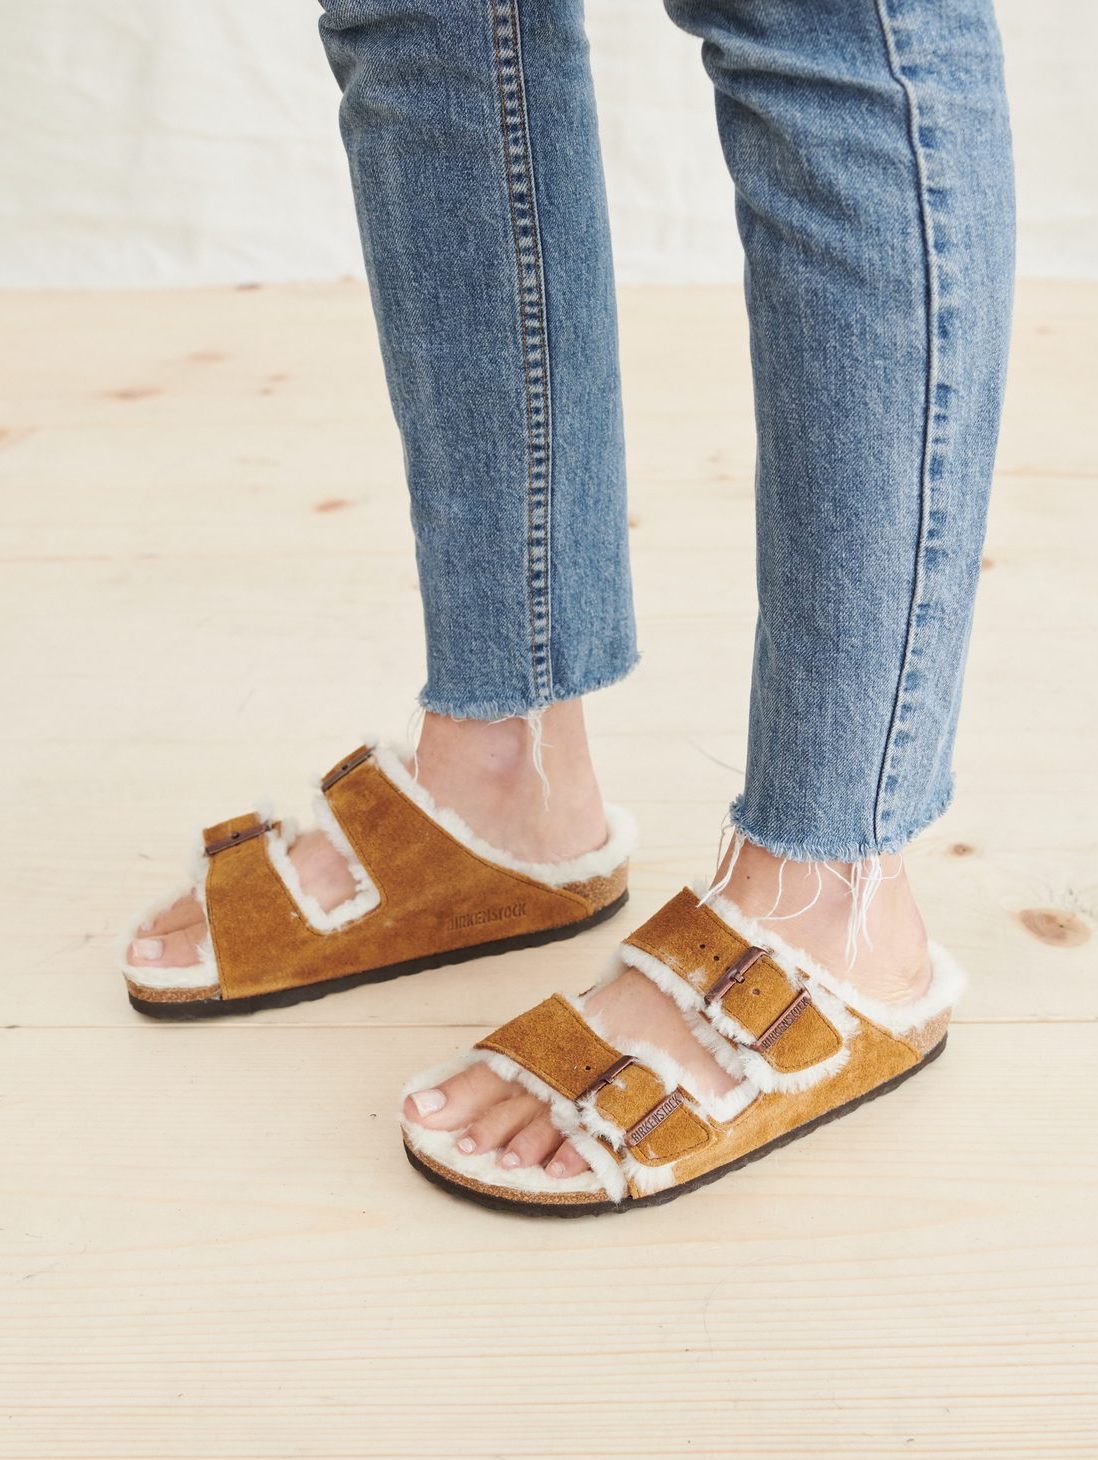 These Shearling-Lined Birkenstock Sandals Are Perfect for Fall